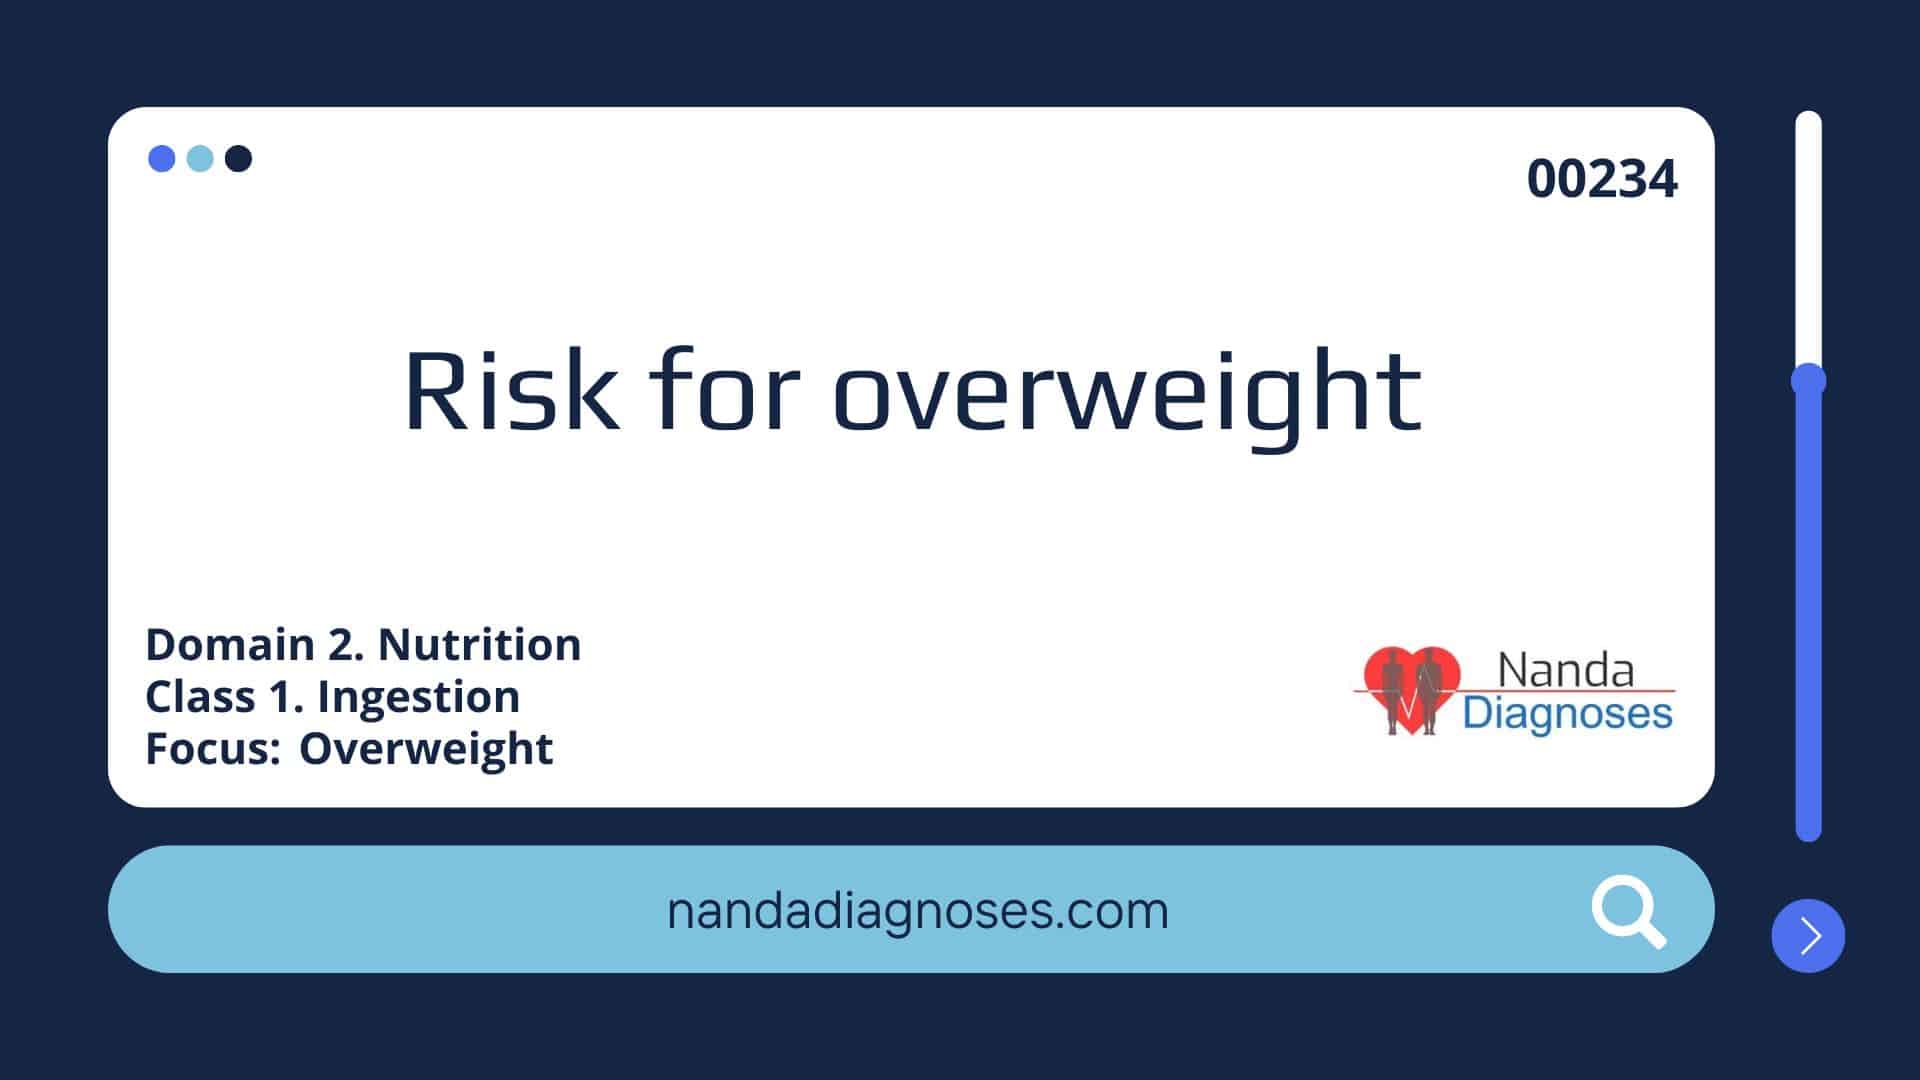 Risk for overweight